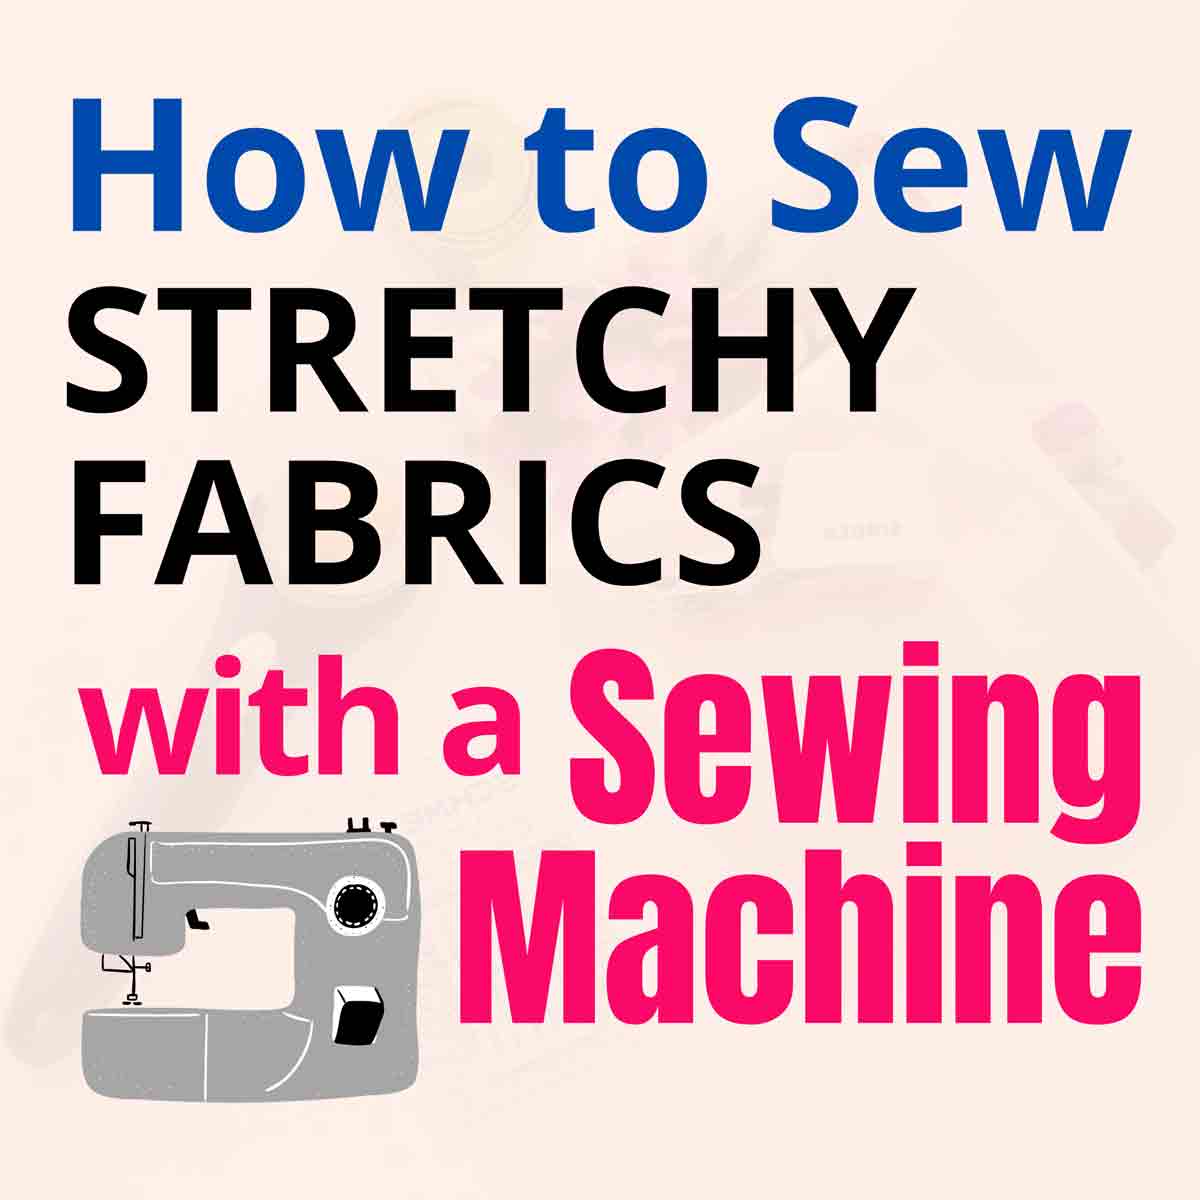 Sewing Stretchy Fabrics - 3 Simple Steps for Success!